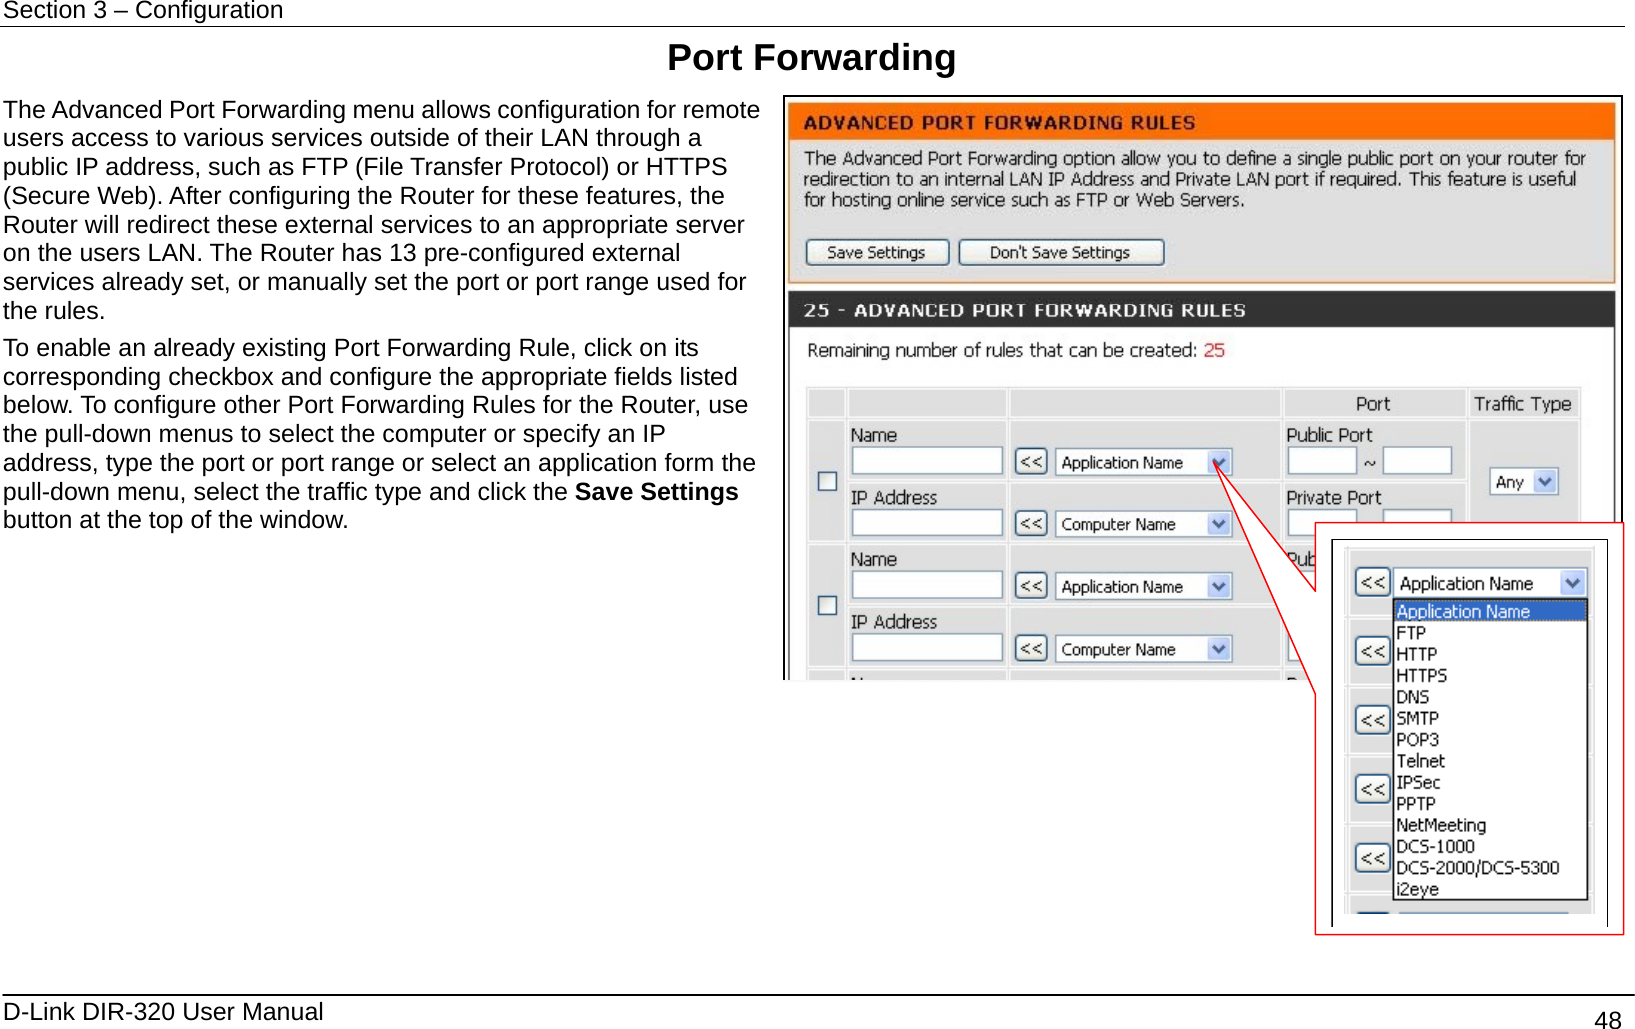 Section 3 – Configuration   D-Link DIR-320 User Manual                                       48 Port Forwarding The Advanced Port Forwarding menu allows configuration for remote users access to various services outside of their LAN through a public IP address, such as FTP (File Transfer Protocol) or HTTPS (Secure Web). After configuring the Router for these features, the Router will redirect these external services to an appropriate server on the users LAN. The Router has 13 pre-configured external services already set, or manually set the port or port range used for the rules.   To enable an already existing Port Forwarding Rule, click on its corresponding checkbox and configure the appropriate fields listed below. To configure other Port Forwarding Rules for the Router, use the pull-down menus to select the computer or specify an IP address, type the port or port range or select an application form the pull-down menu, select the traffic type and click the Save Settings button at the top of the window.              